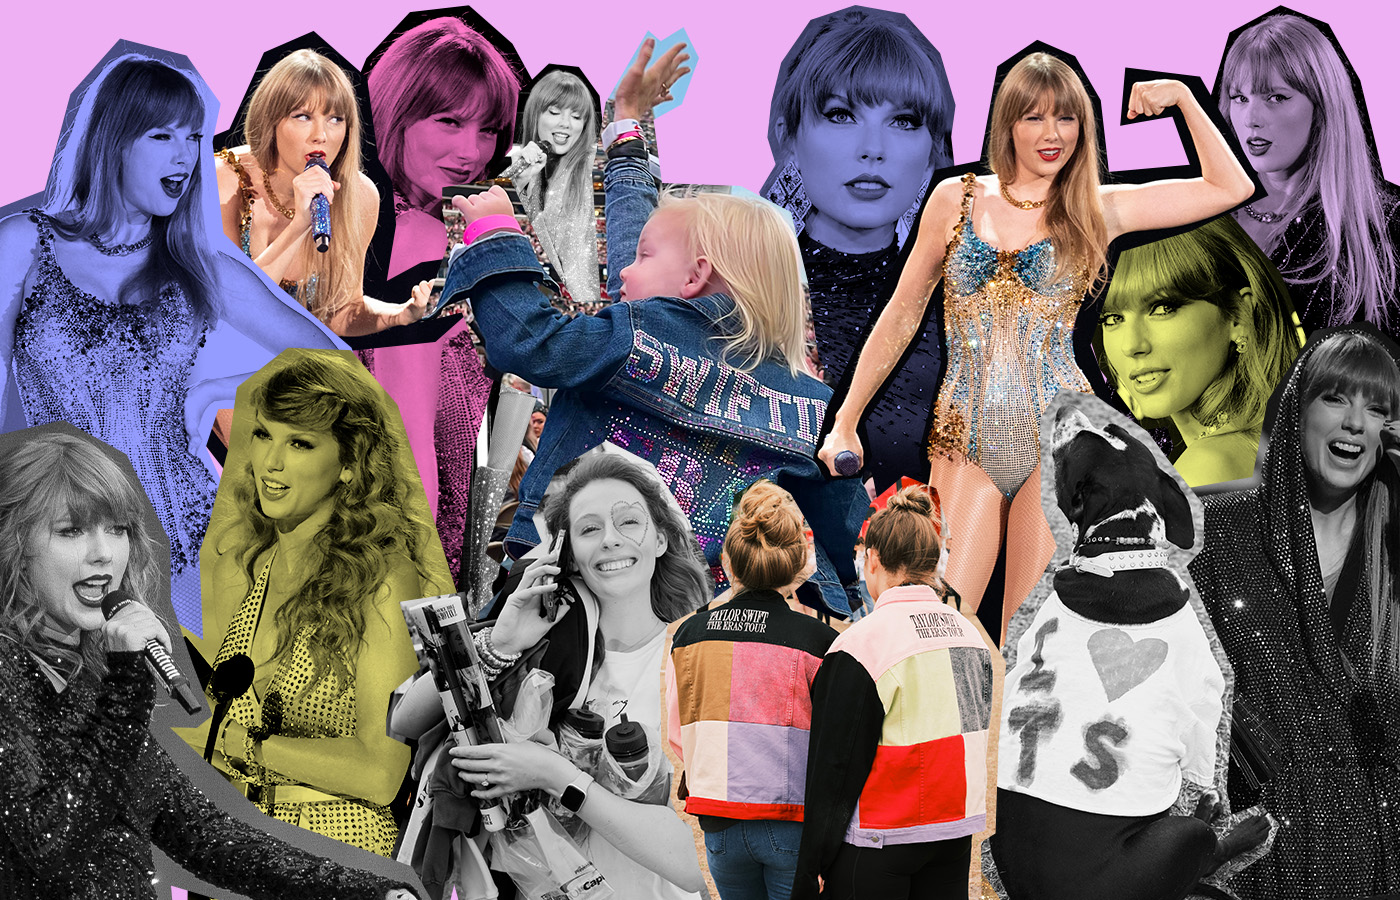 A Guide To Fall Fashion According To Taylor Swift - Fans of Taylor